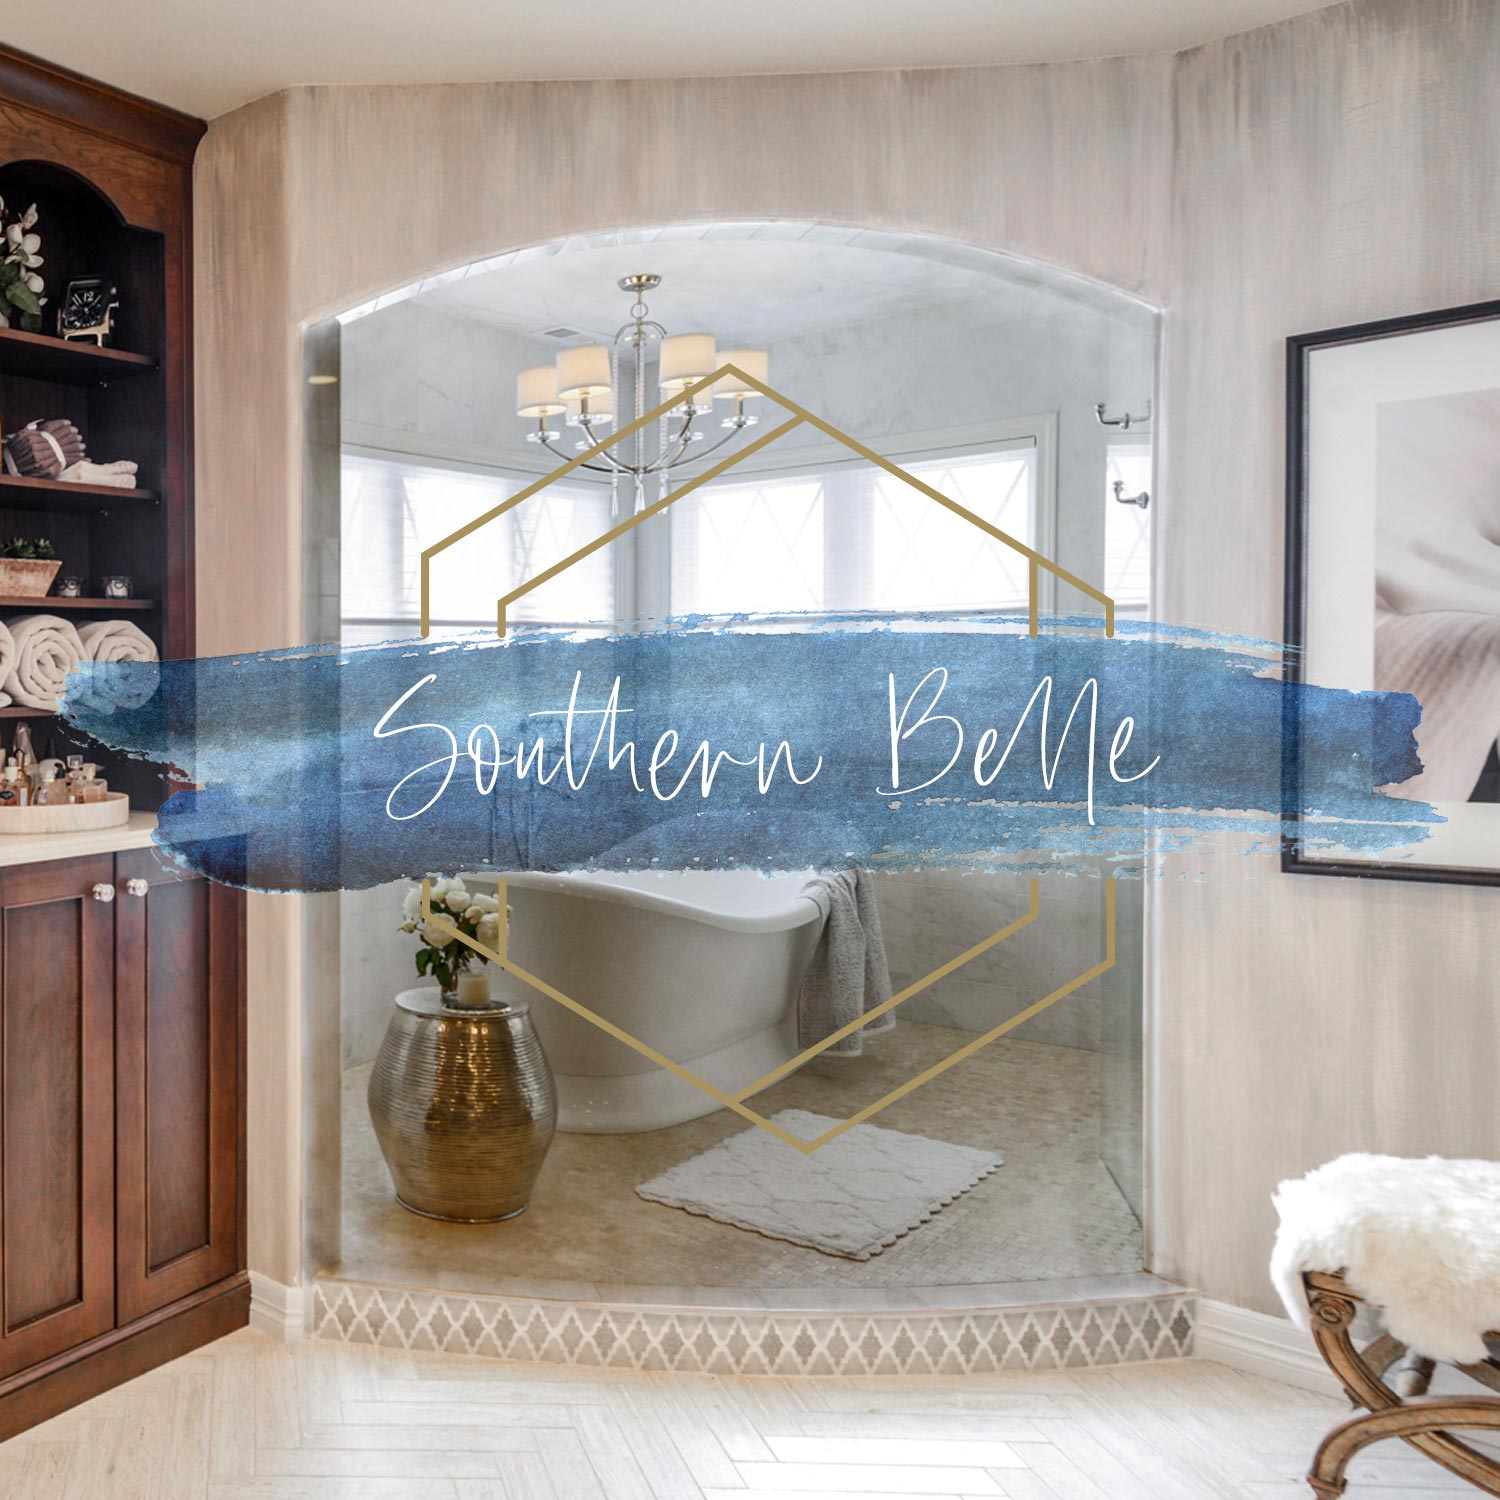 Haven-Interiors-Projects-Southern-Belle.jpg